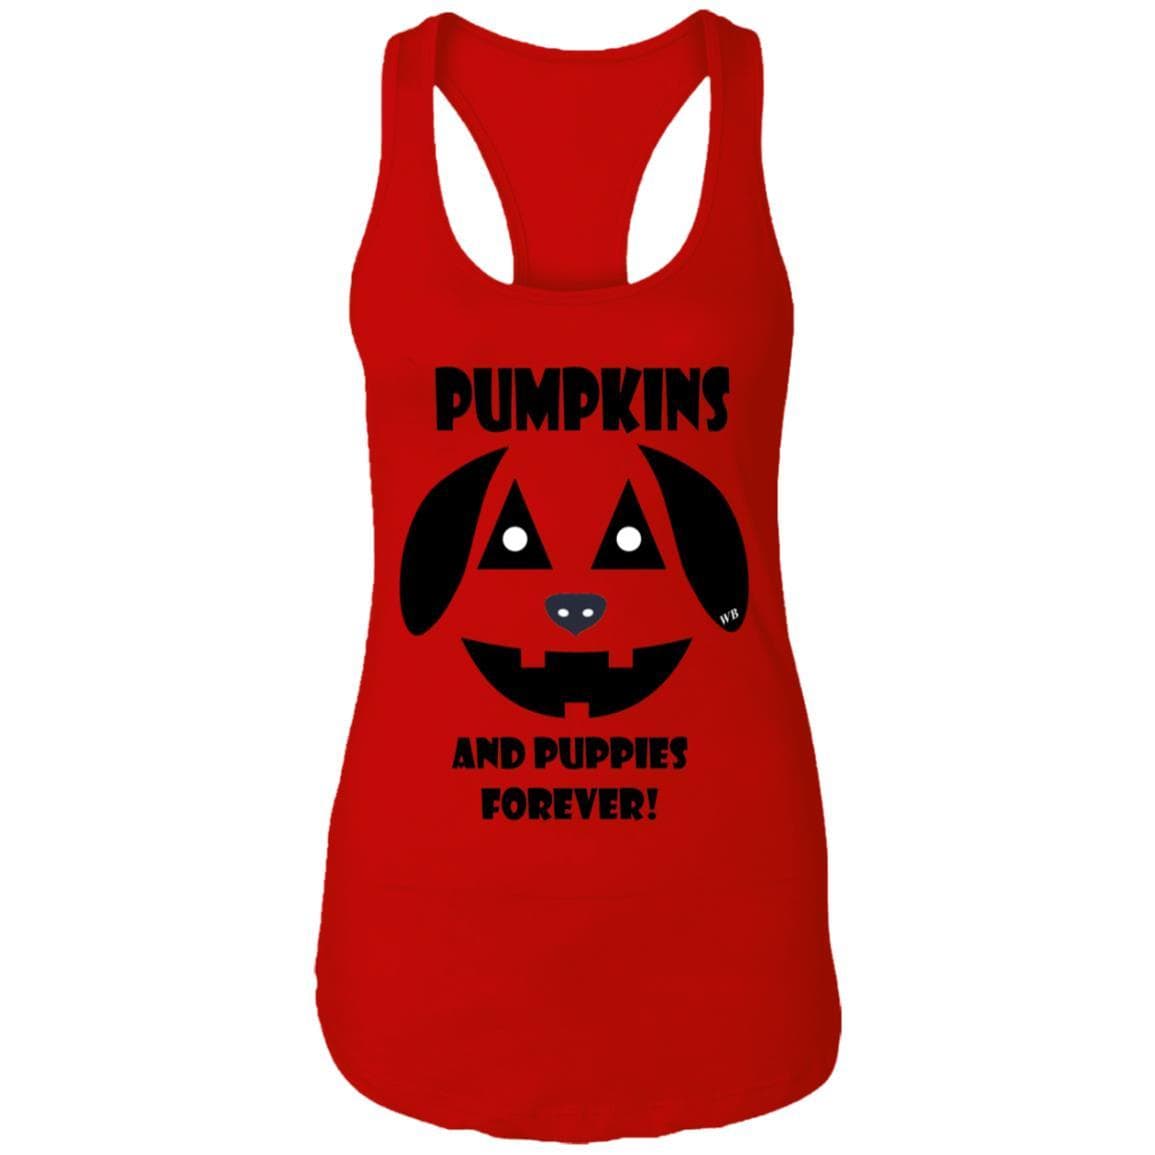 Tank Top Red / X-Small WineyBitches.Co "Pumpkins And Puppies Forever" Halloween Ladies Ideal Racerback Tank WineyBitchesCo